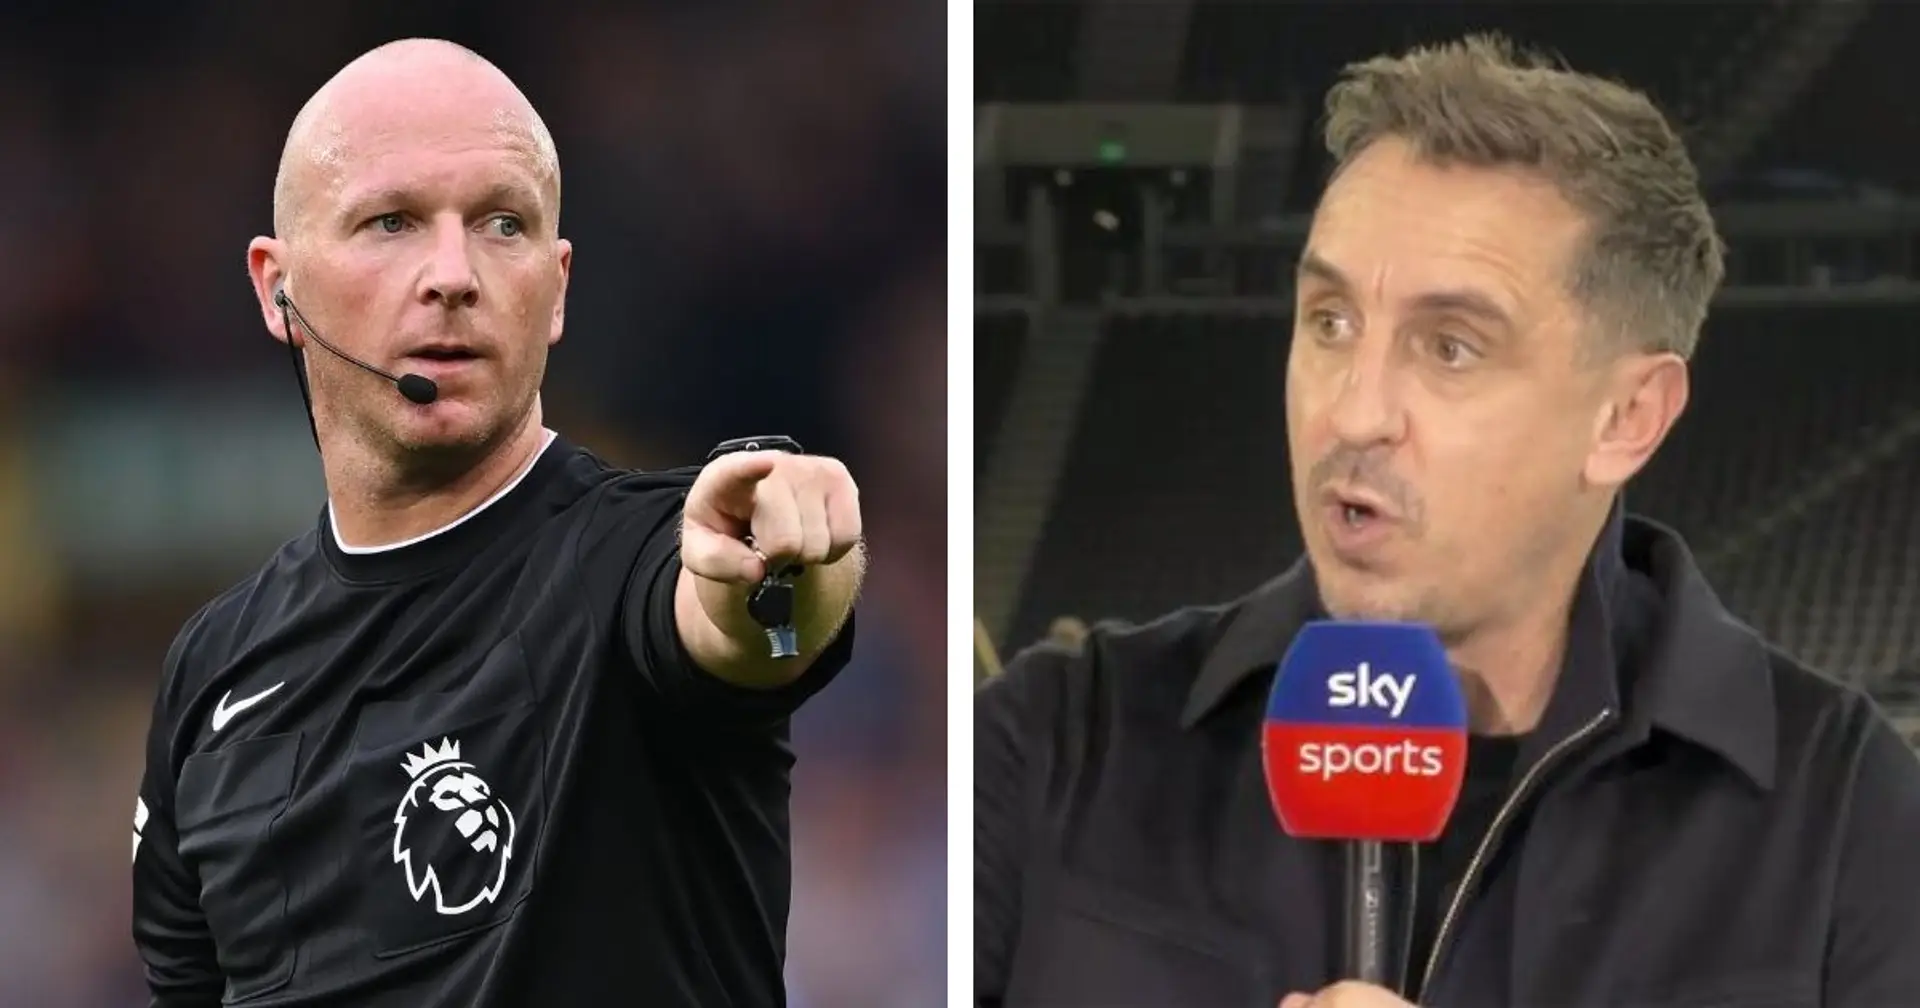 'Imagine how the referees feel, let's be human': Neville says PGMOL's apology is enough and should be 'valued' by Liverpool